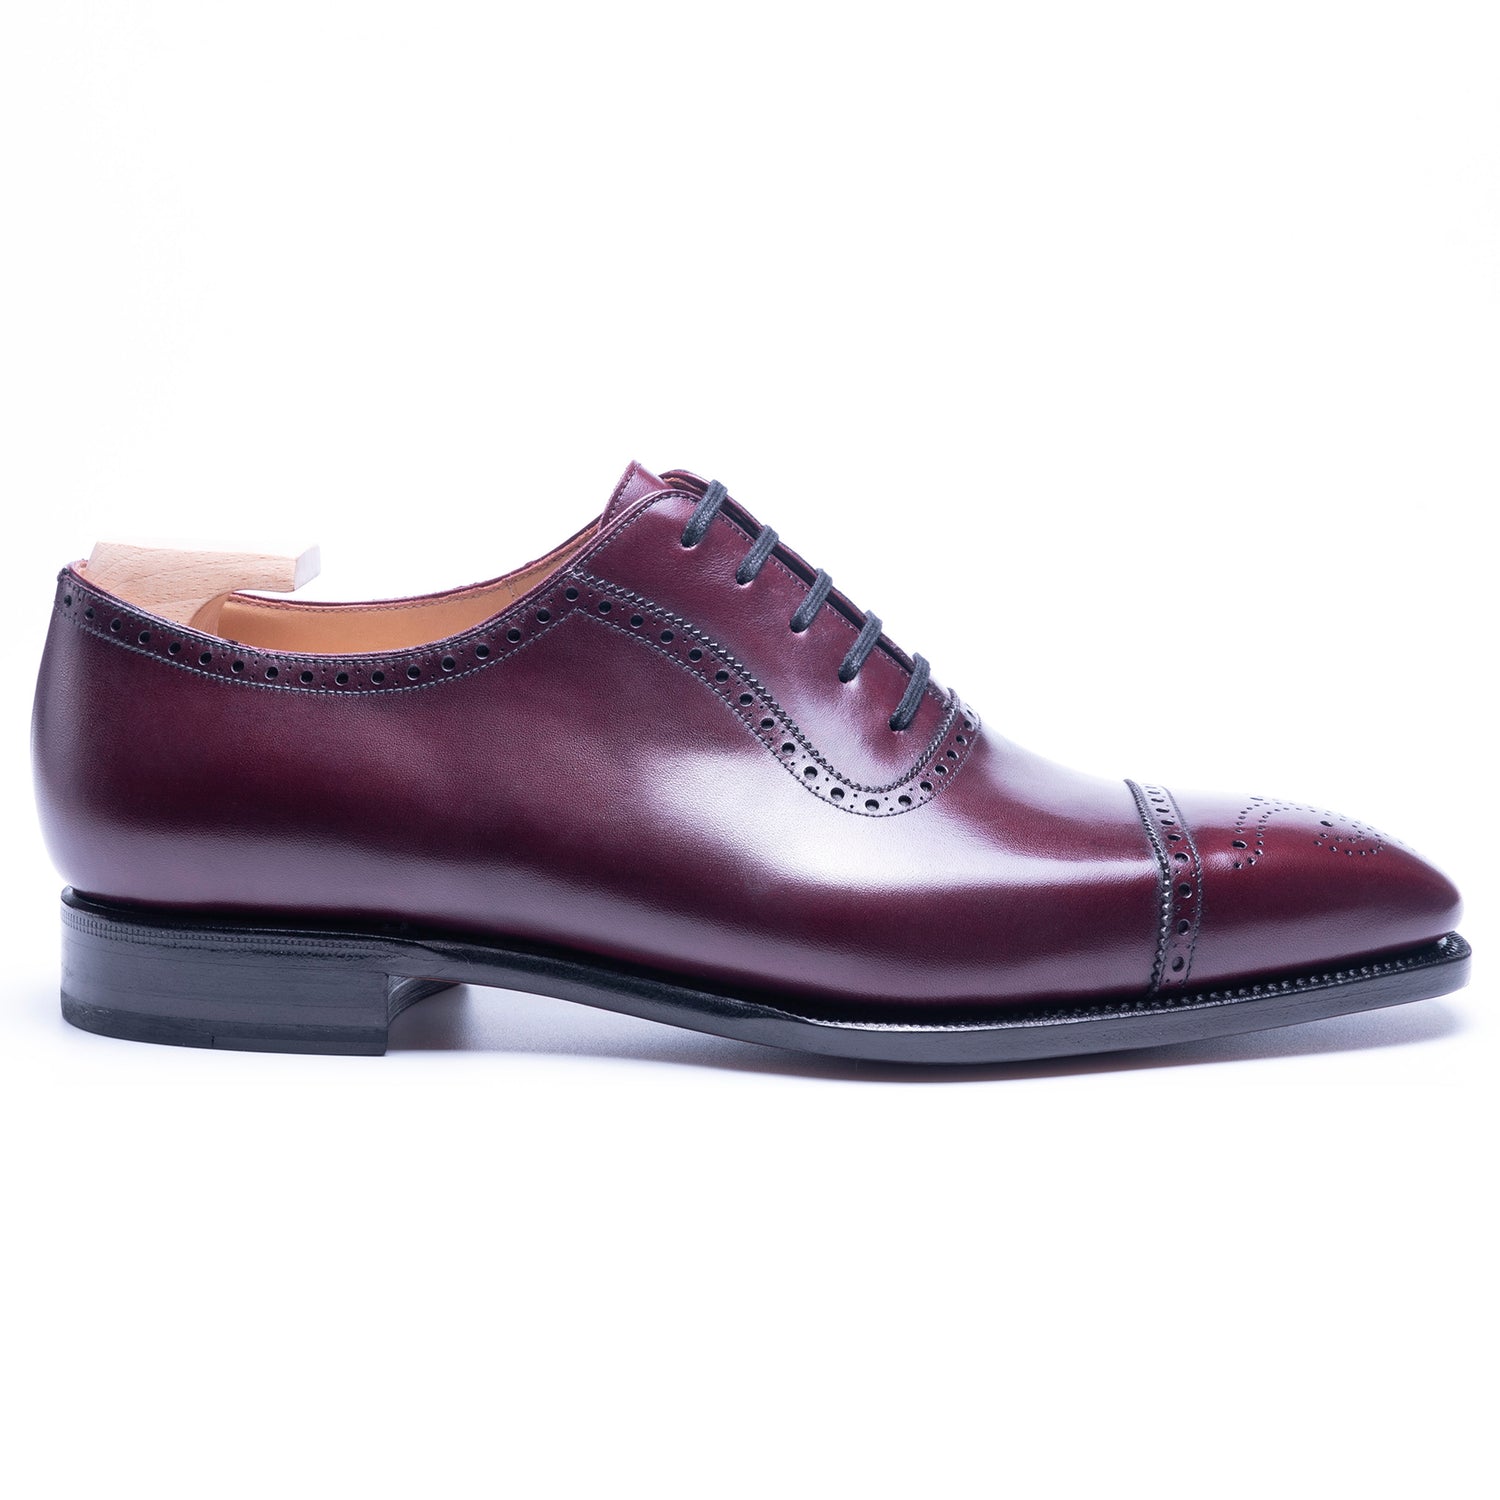 TLB Mallorca leather shoes 240 / PICASSO / VEGANO BURGUNDY